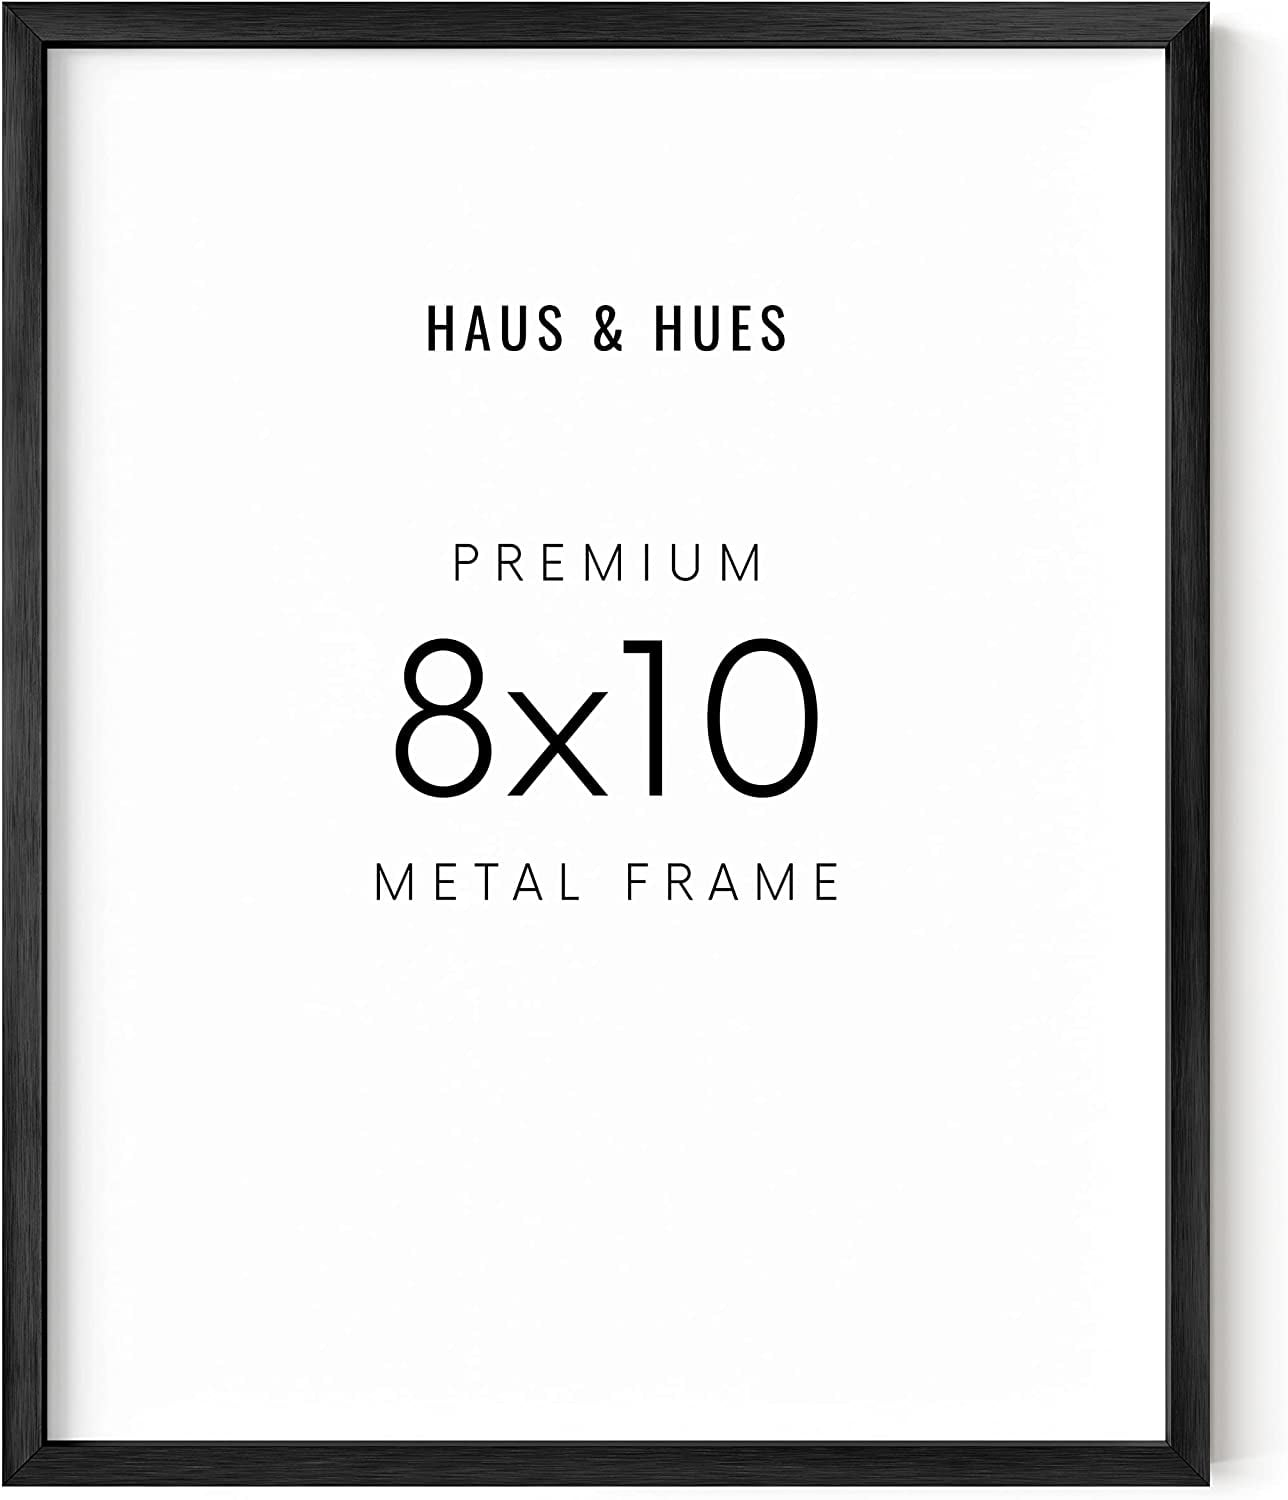 Haus and Hues 16x20 Picture Frames for Wall - Gold Picture Frames Set of 3,  16x20 Poster Frames for Wall, Gold Frames for Gallery Wall, 20x16 Frame